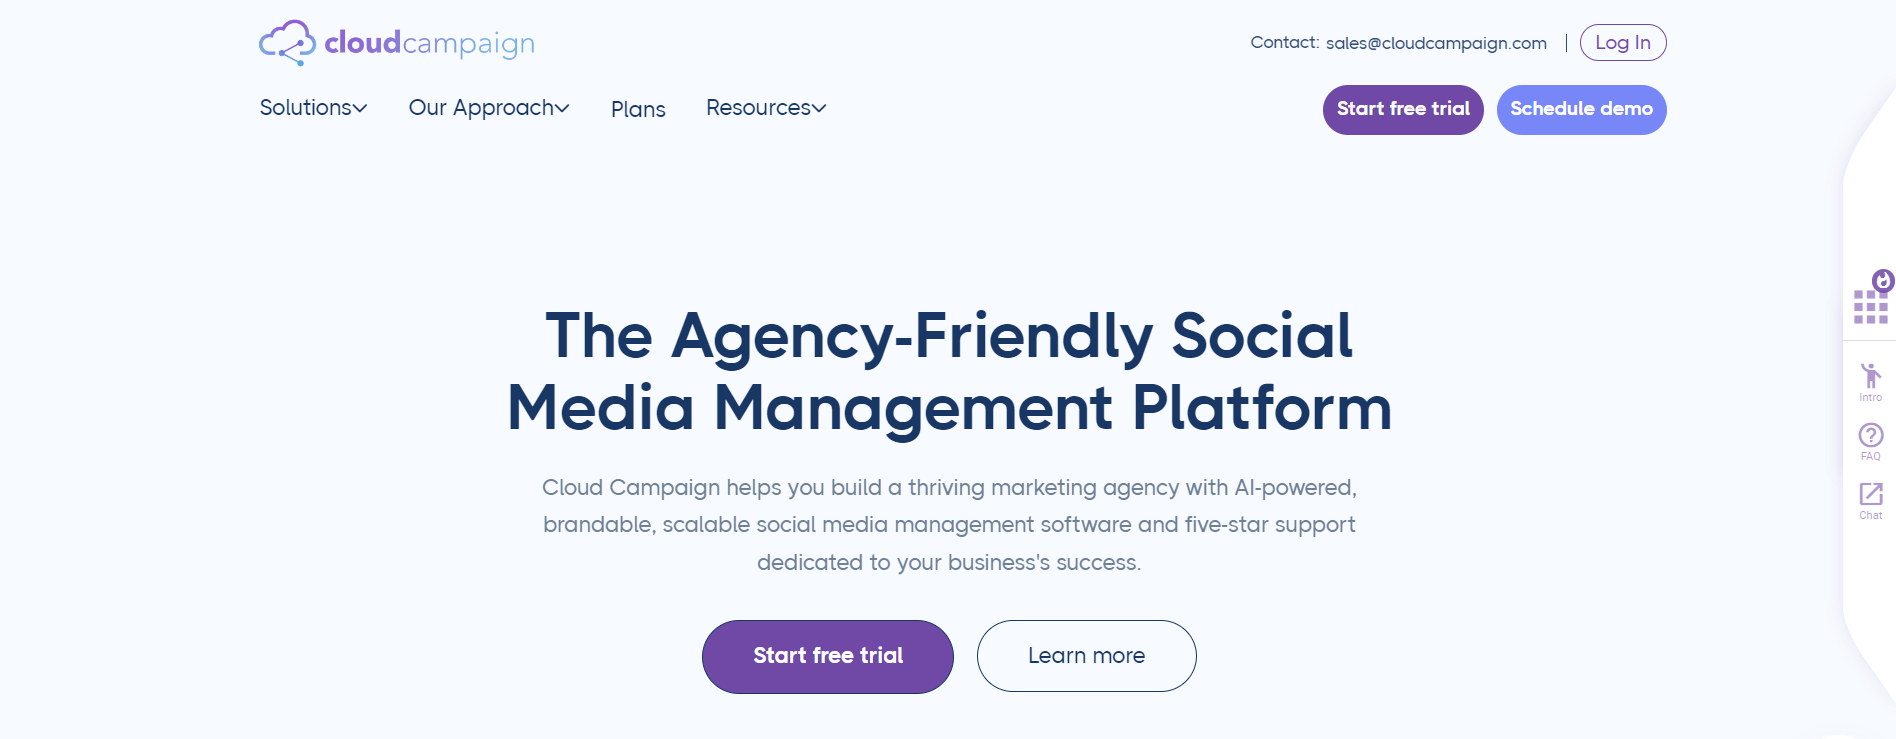 Cloud Campaign homepage promoting its agency-friendly social media management platform, with options to start a free trial or schedule a demo.